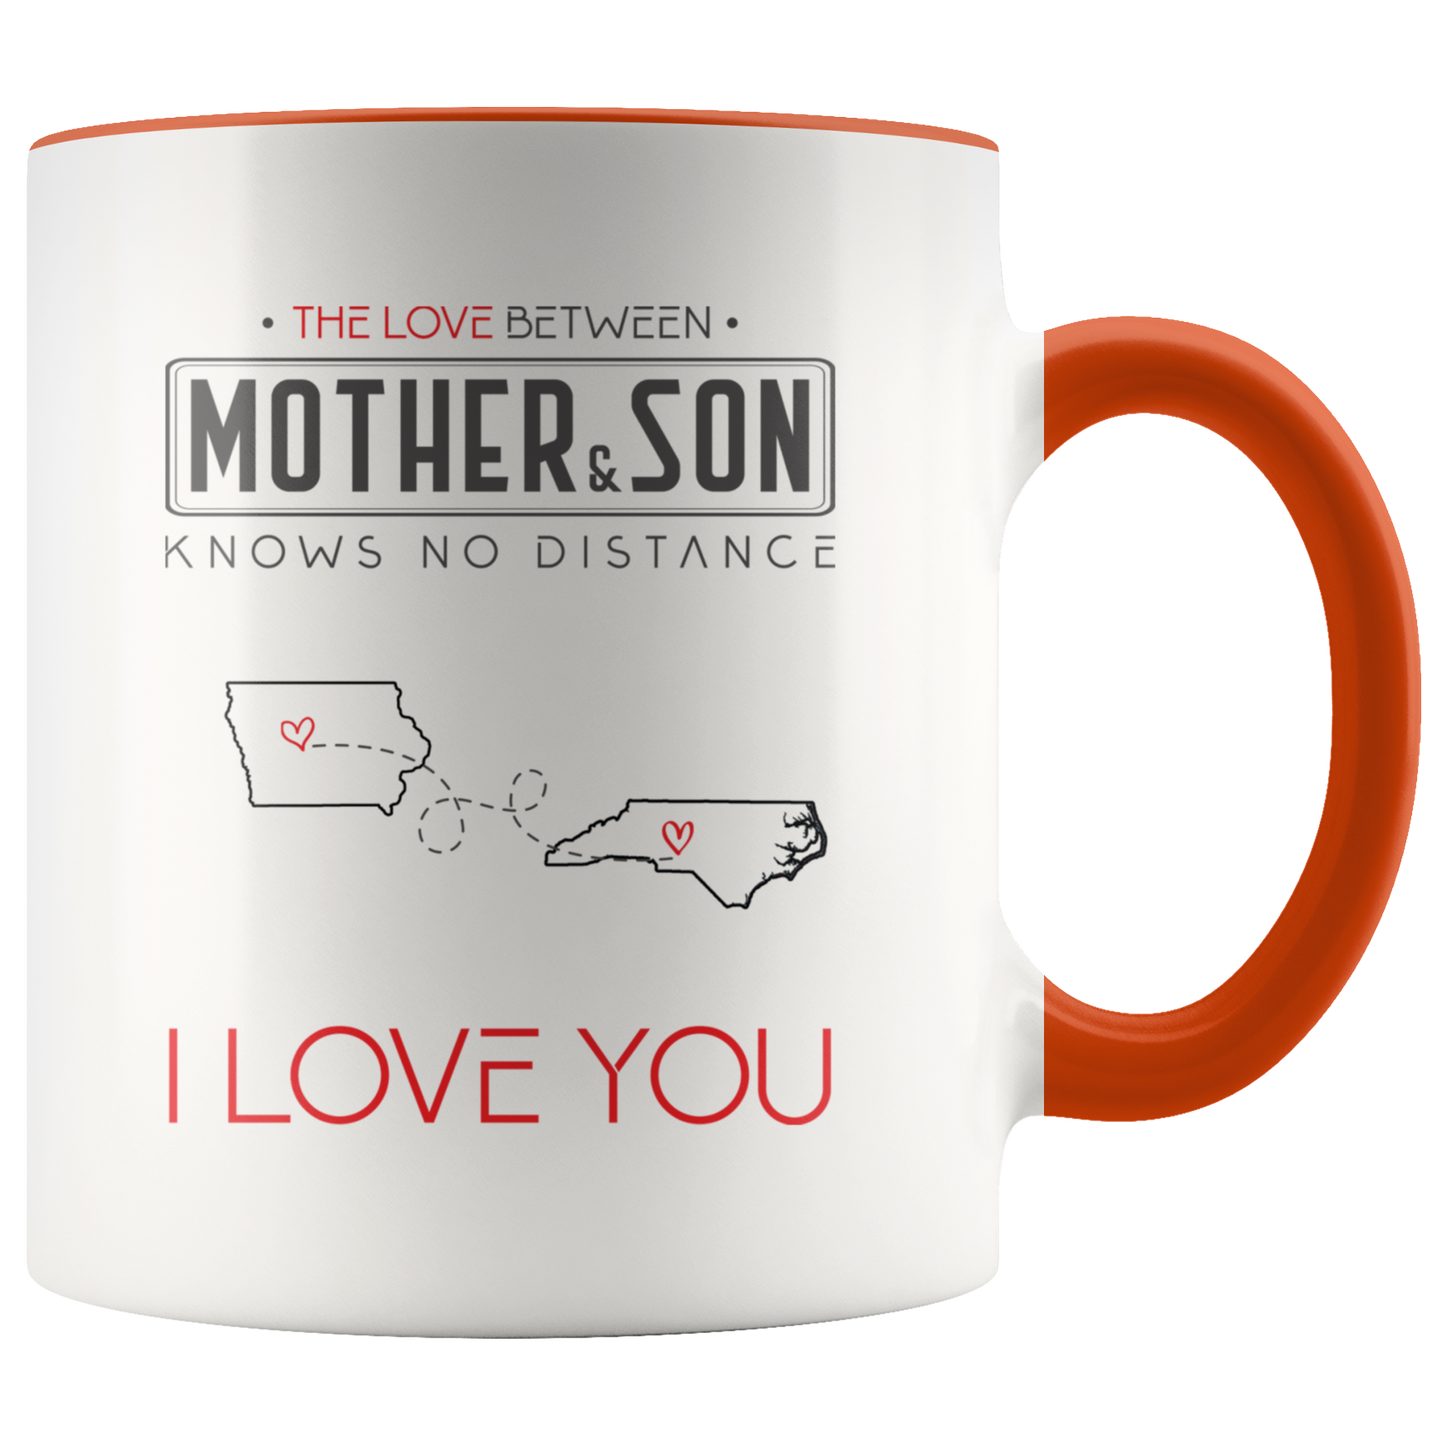 cust_80801_8229-sp-23468 - Mother And Son Mug 11 oz - The Love Between Mother And Son K